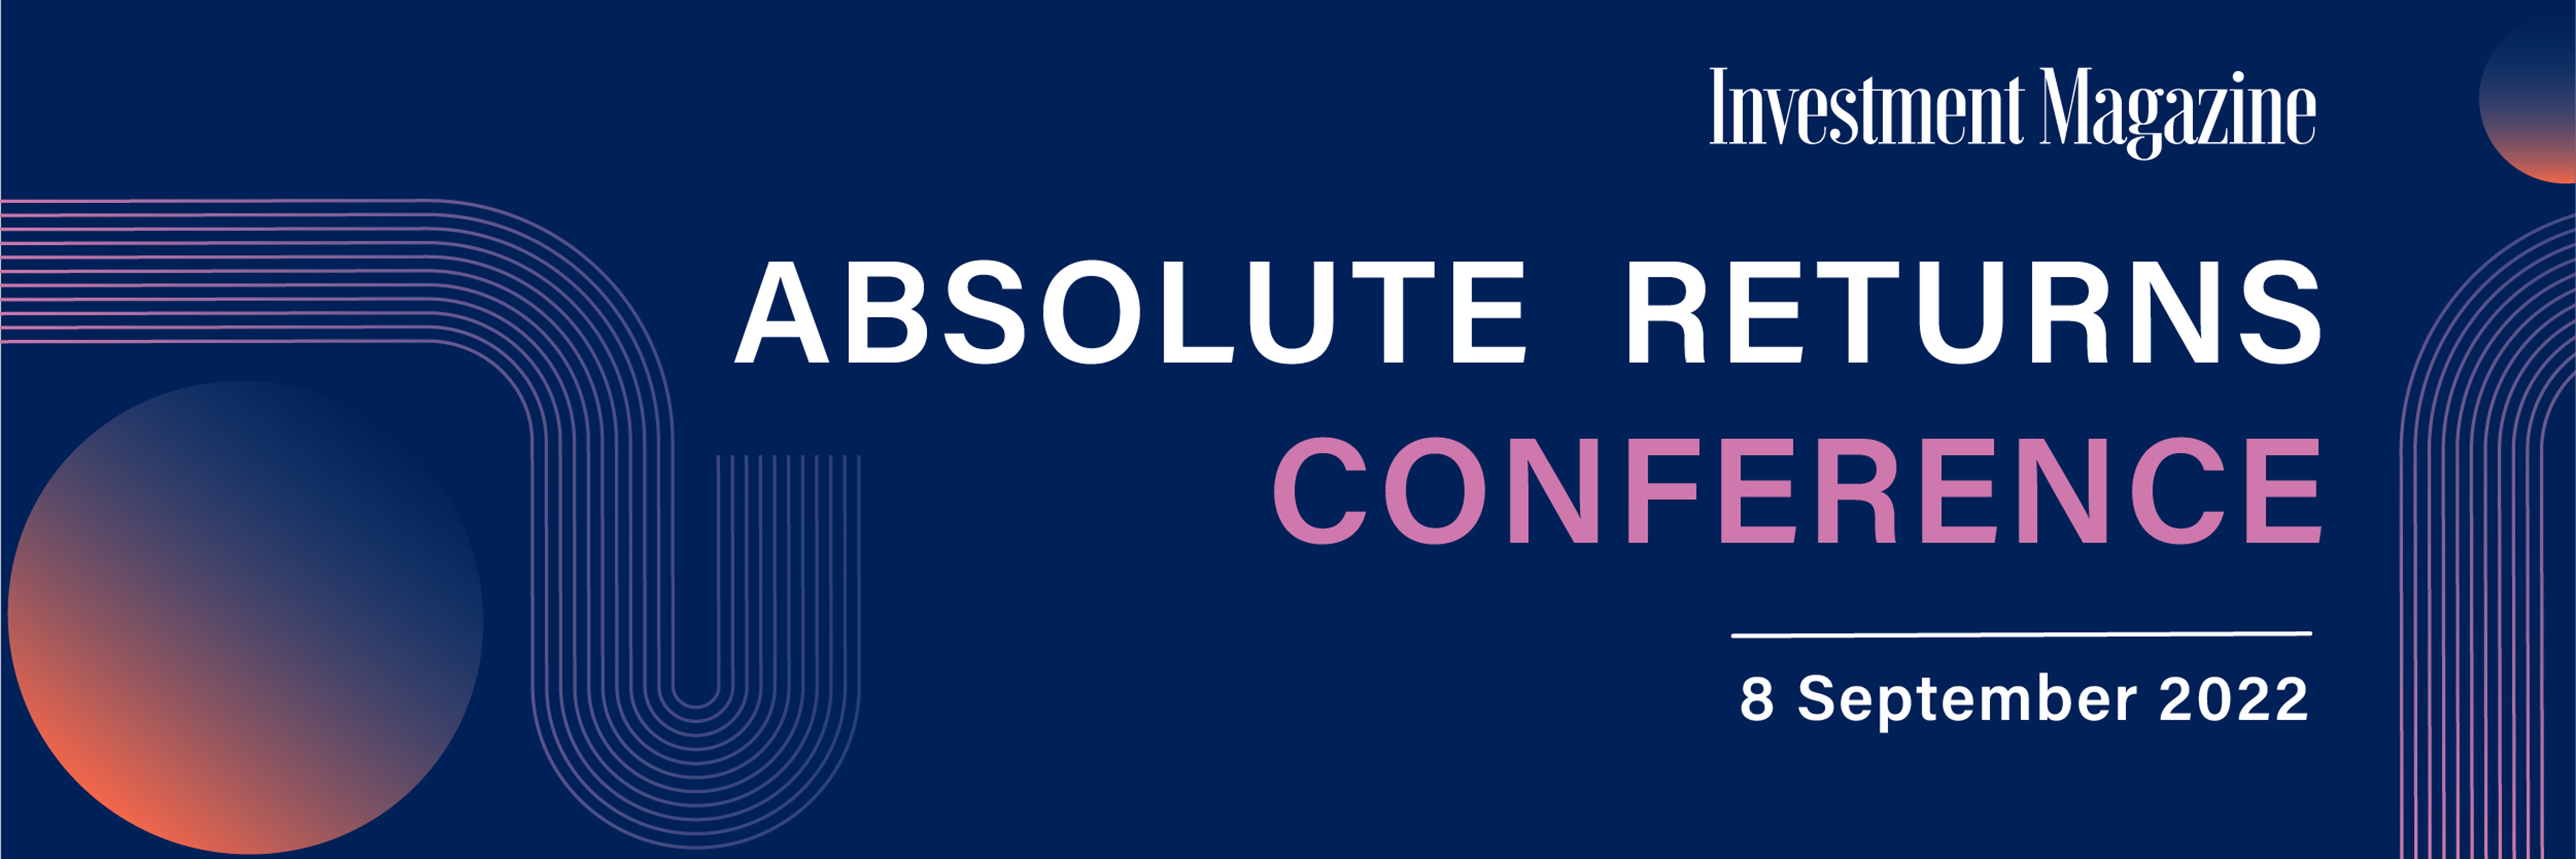 Absolute Returns Conference